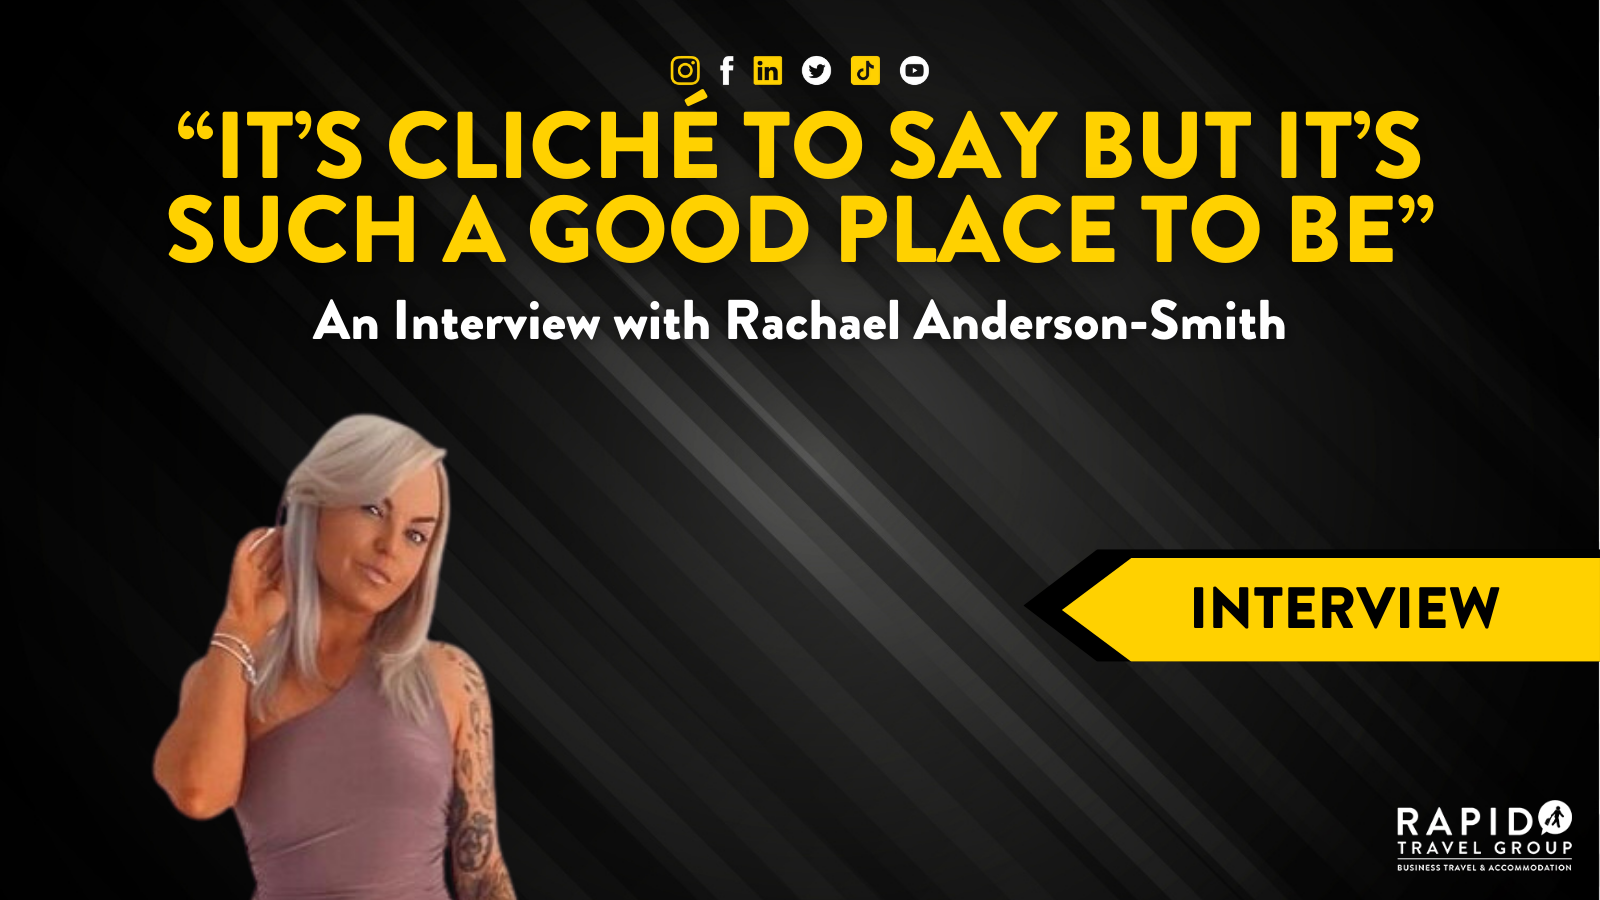 "It's cliche to say but it's such a good place to be." An interview with Rachael Anderson-Smith